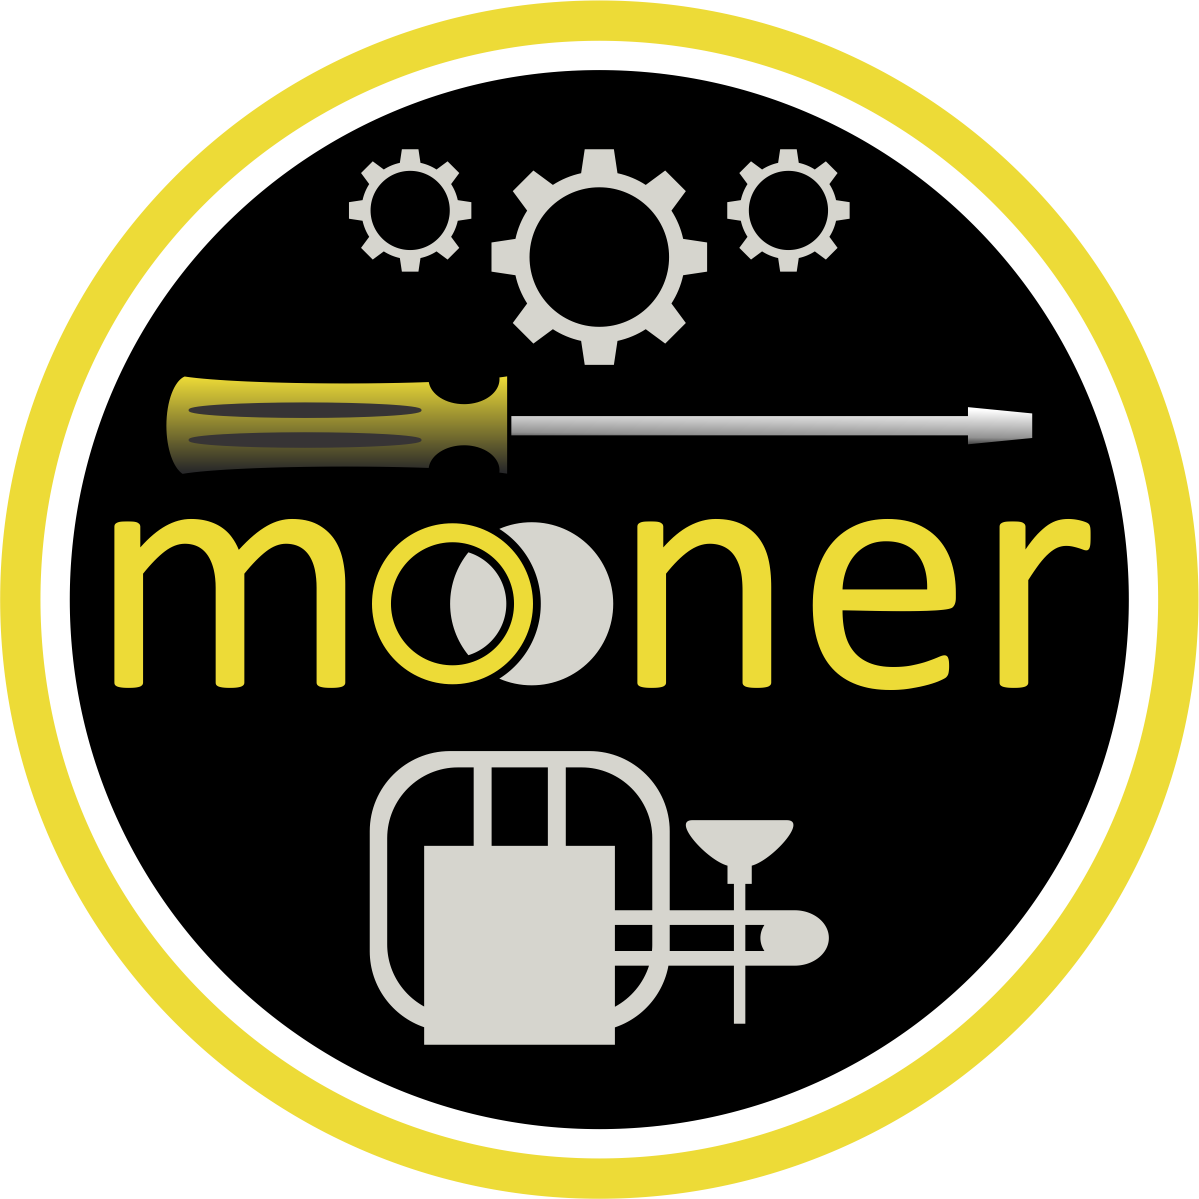 Mooner App – Empowering Everyone To Be Self Employed. In Demand 